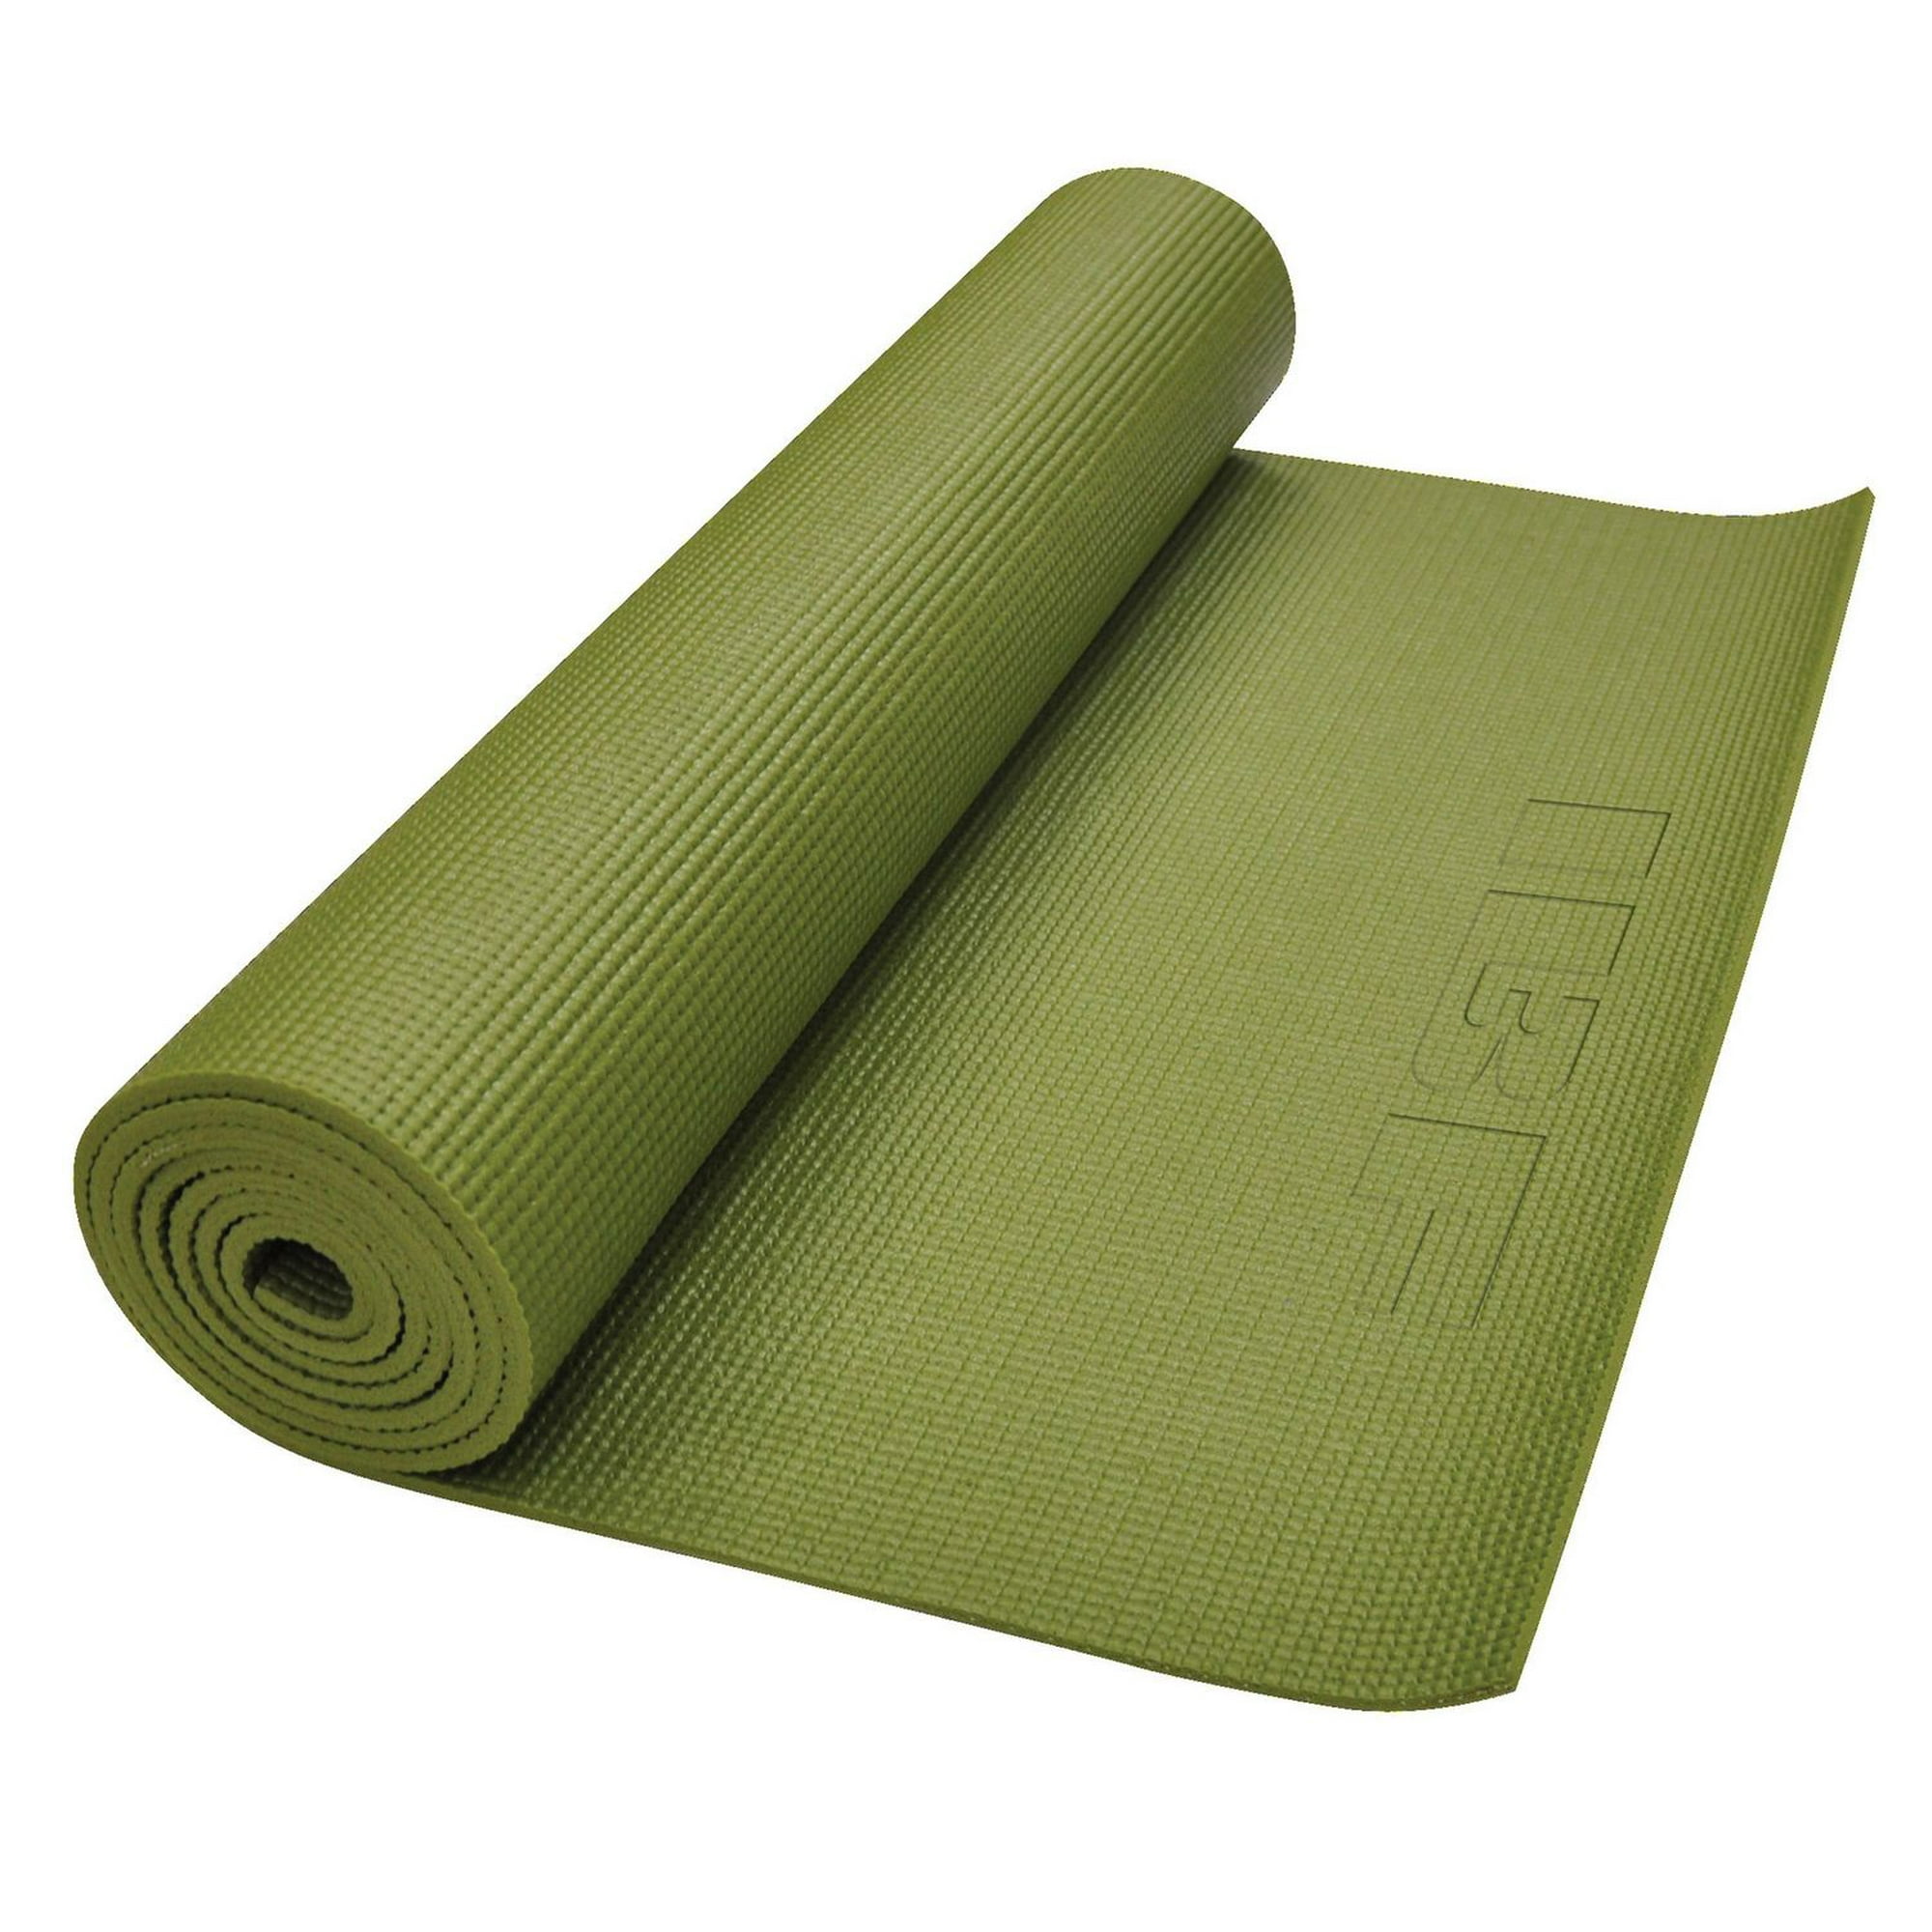 Yoga Mat Thick Non-slip Pilates Workout Fitness Exercise Pad Gym Workout  Home Yoga Mats 